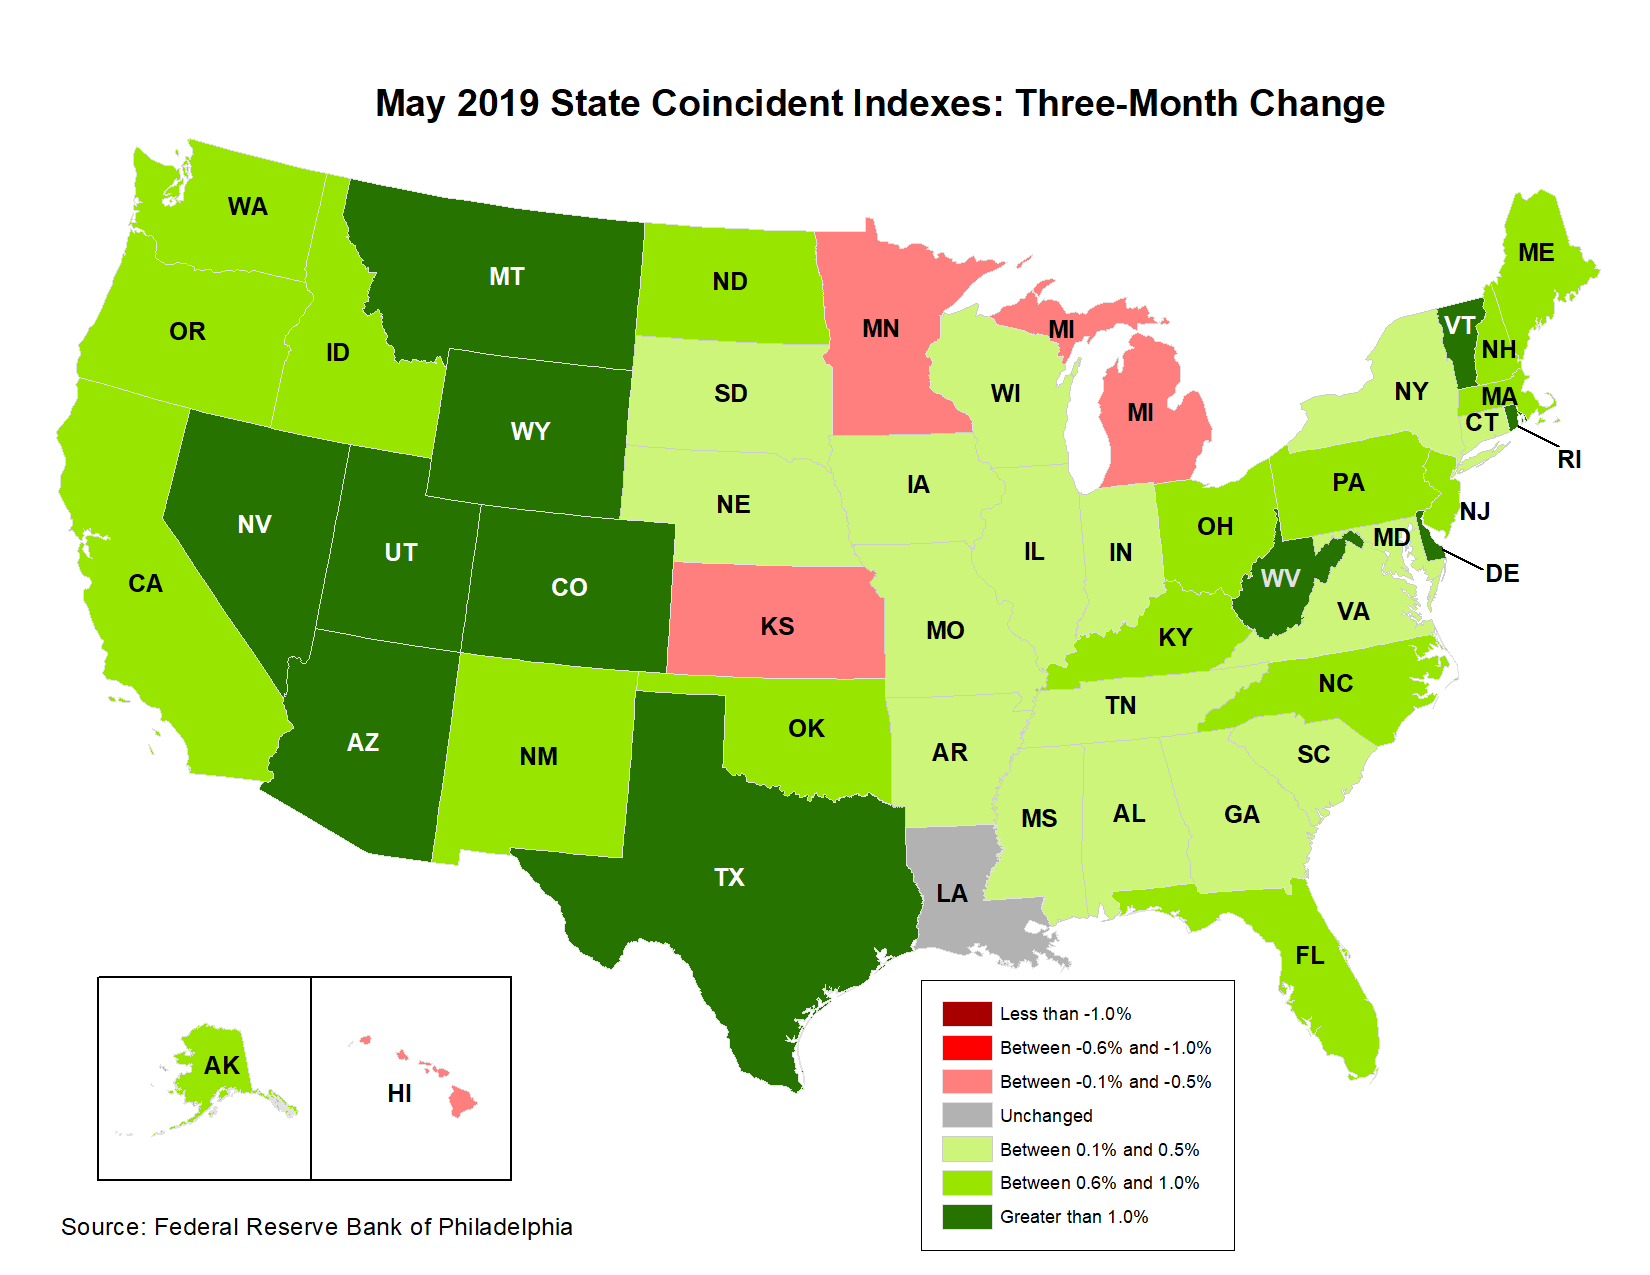 Map of the U.S. showing the State Coincident Indexes Three-Month Change in May 2019